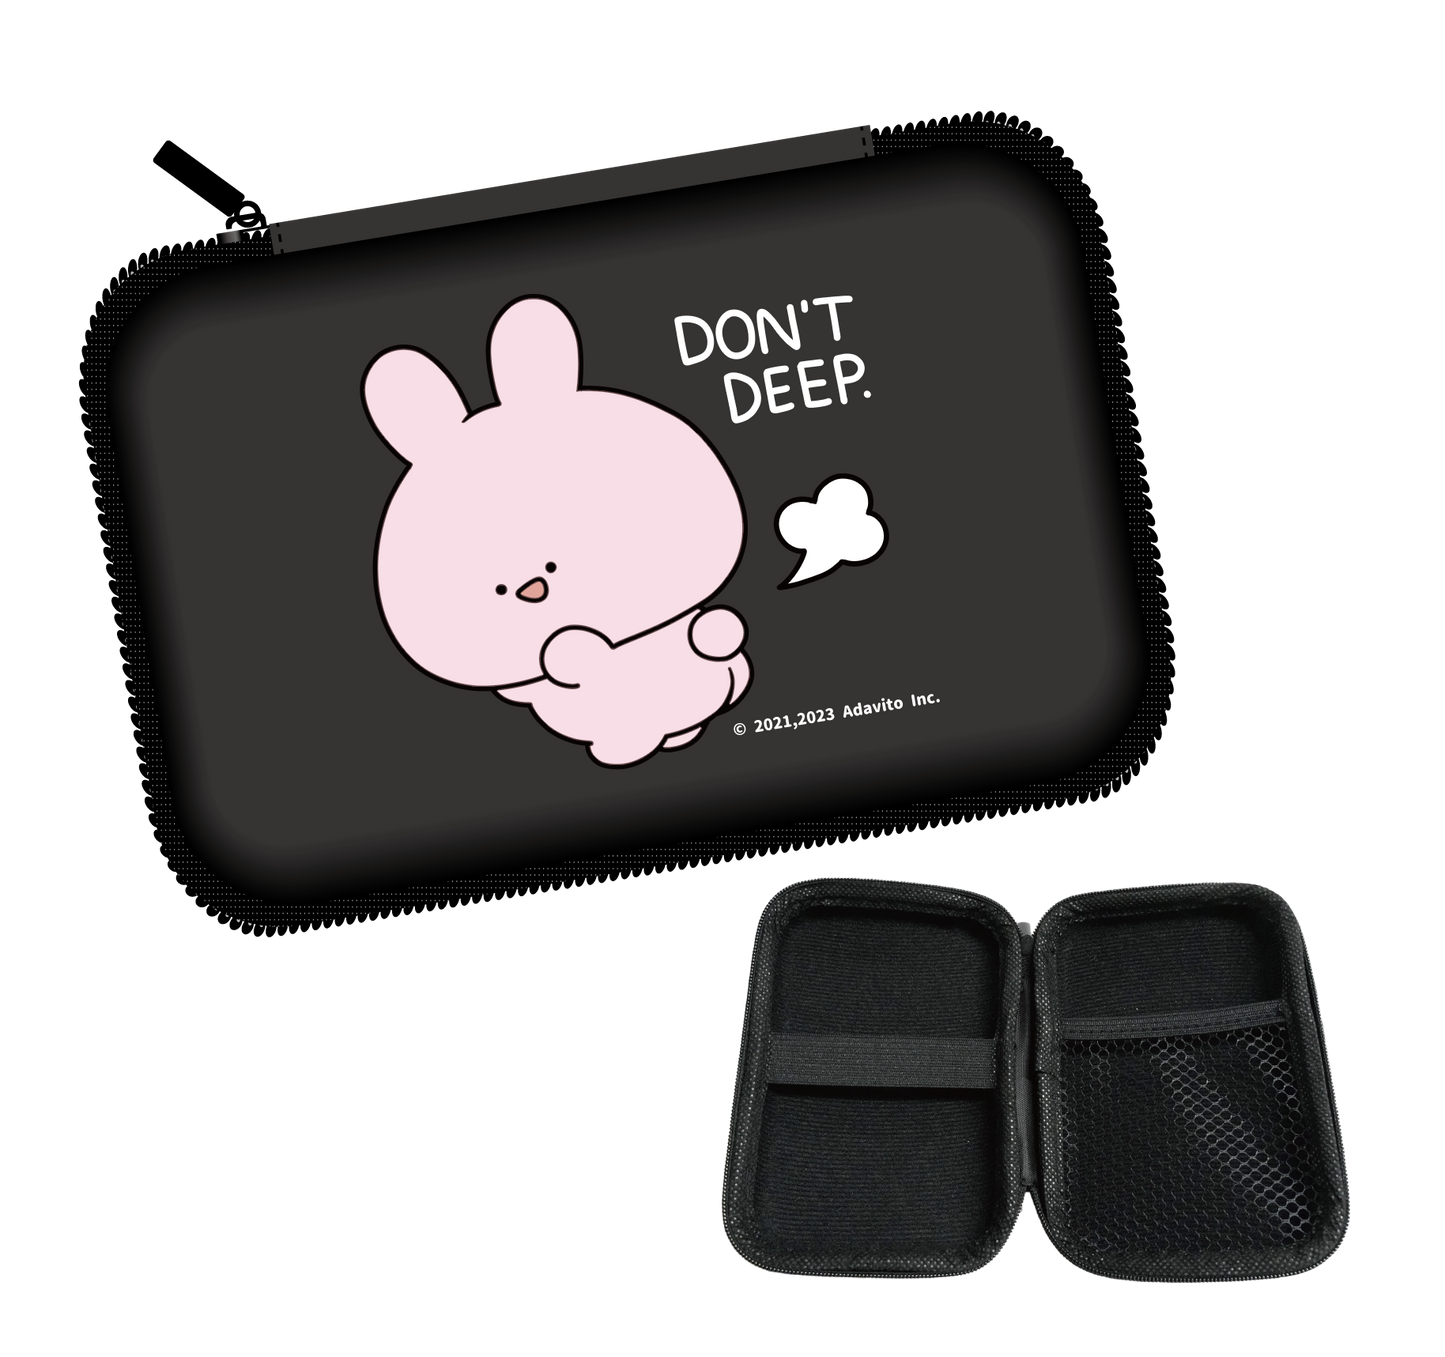 [Asamimi-chan] Mobile multi case [shipped in early March]